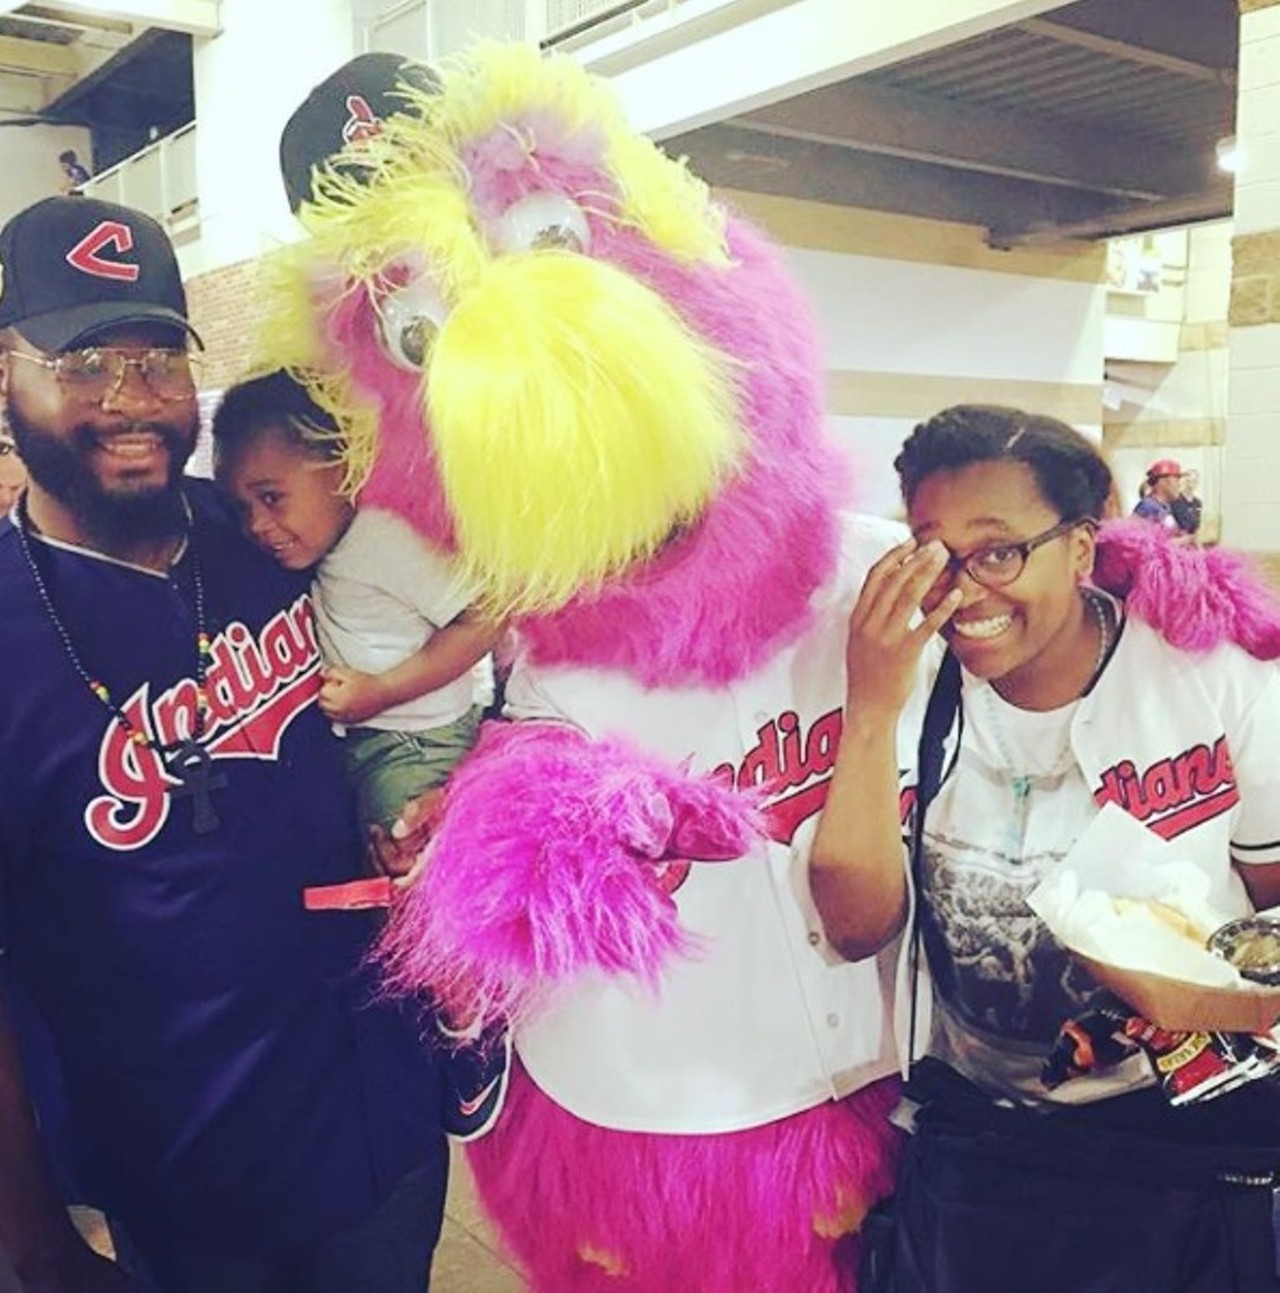 The Mascot Trying To Hang With Your Family
He's big and purple, and seriously, Slider can get a little too nosy. 
Photo via indiaalanna/Instagram